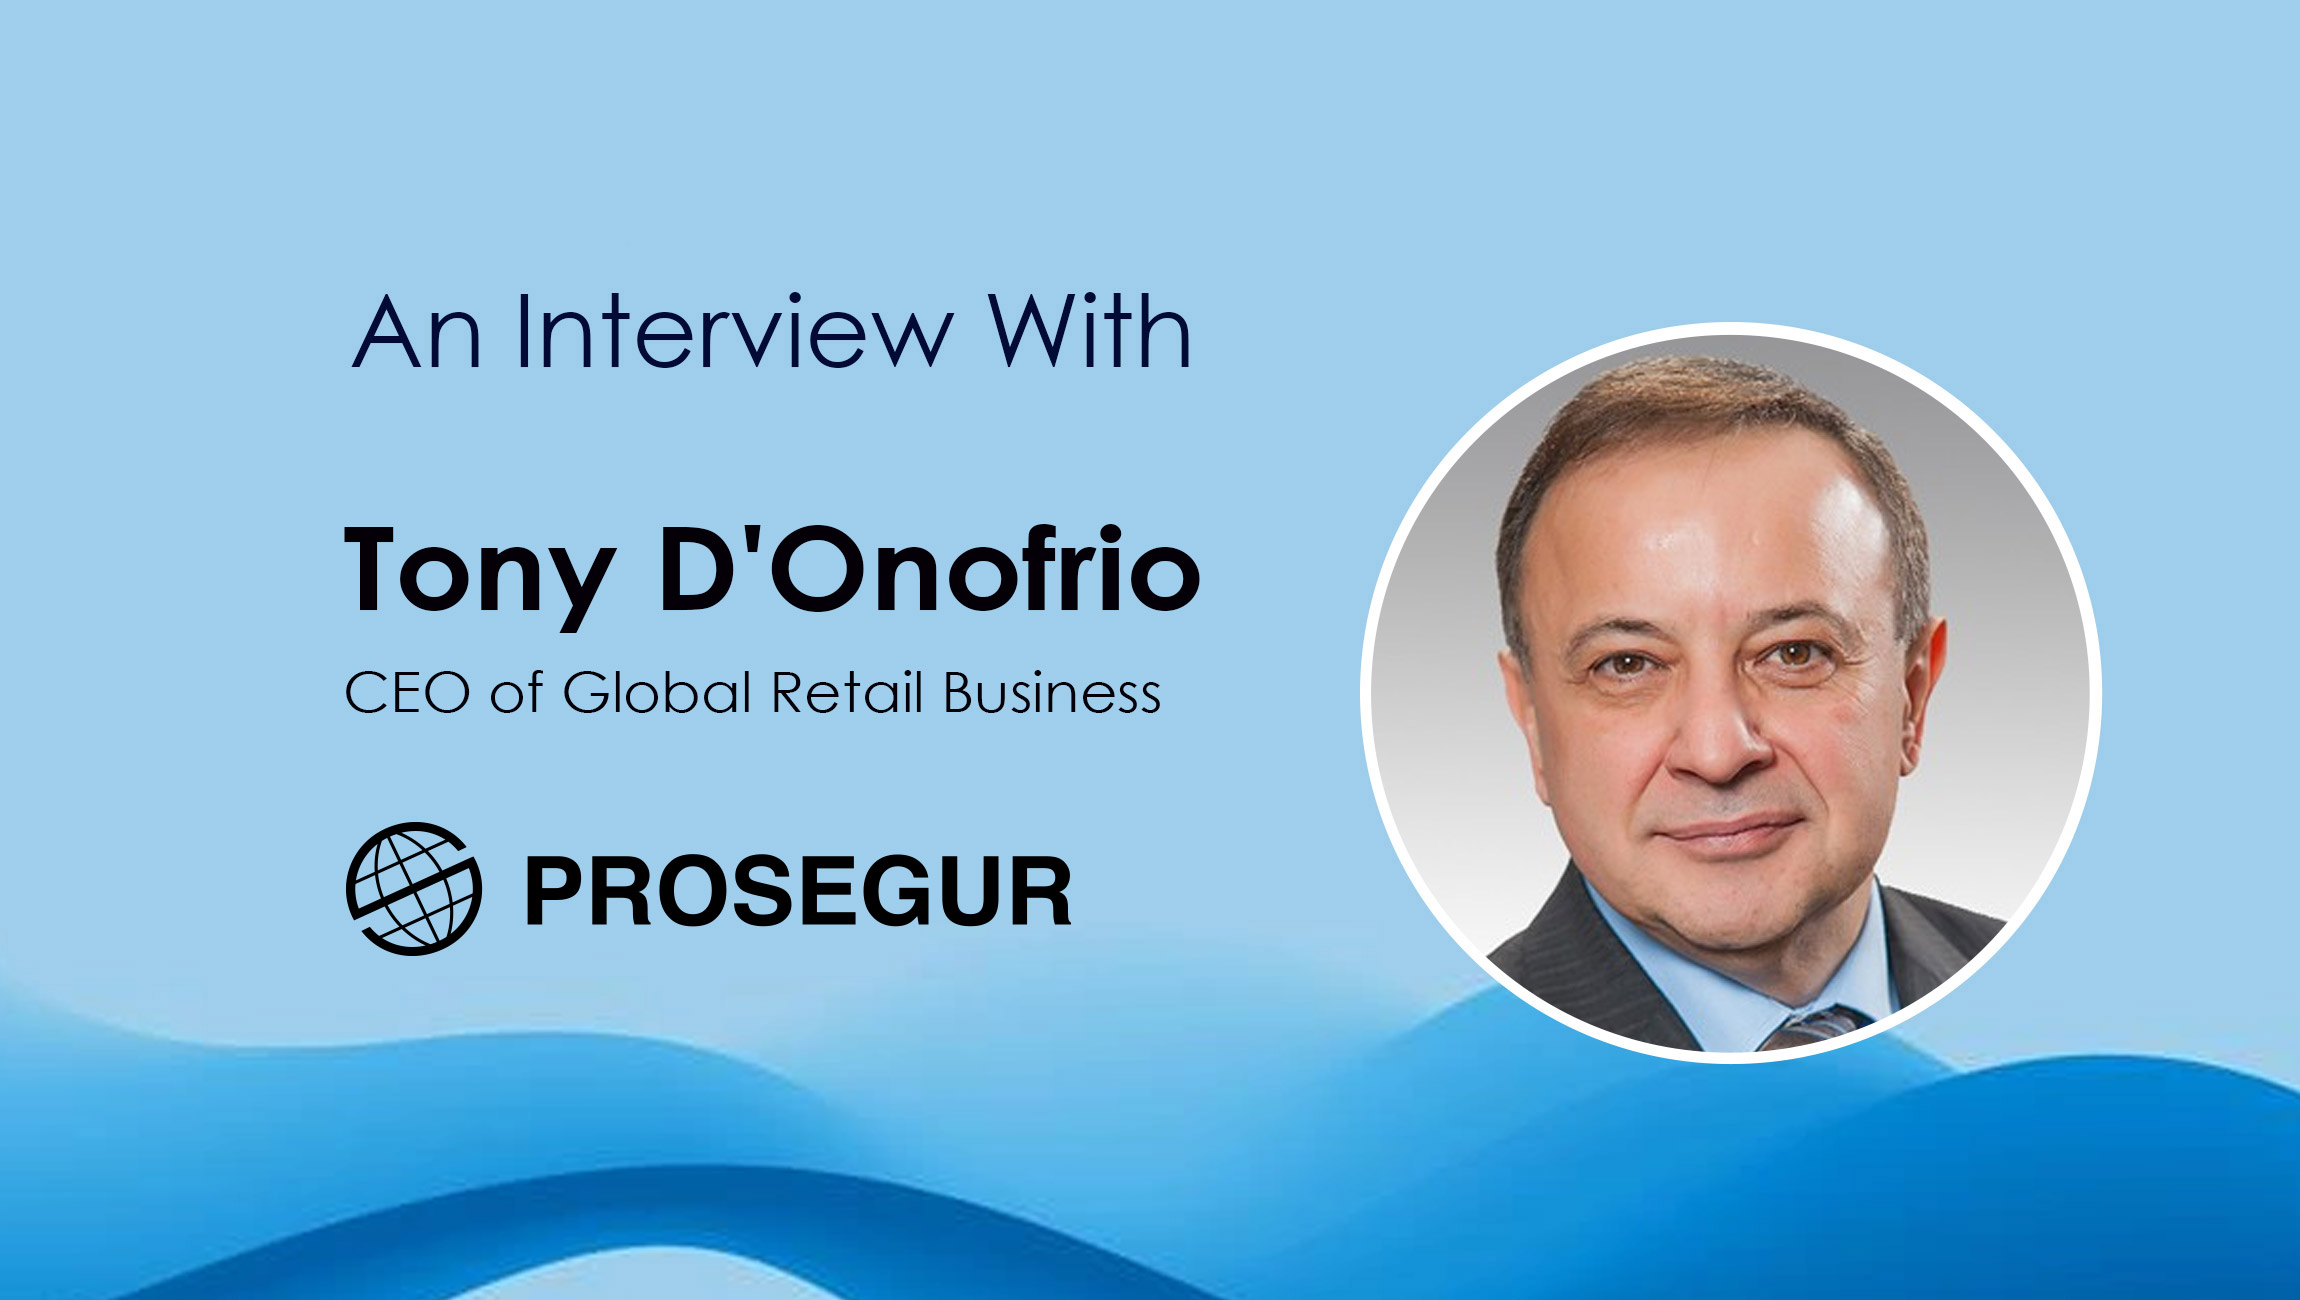 Tony-D'Onofrio_SalesTech Interview with Prosegur Security